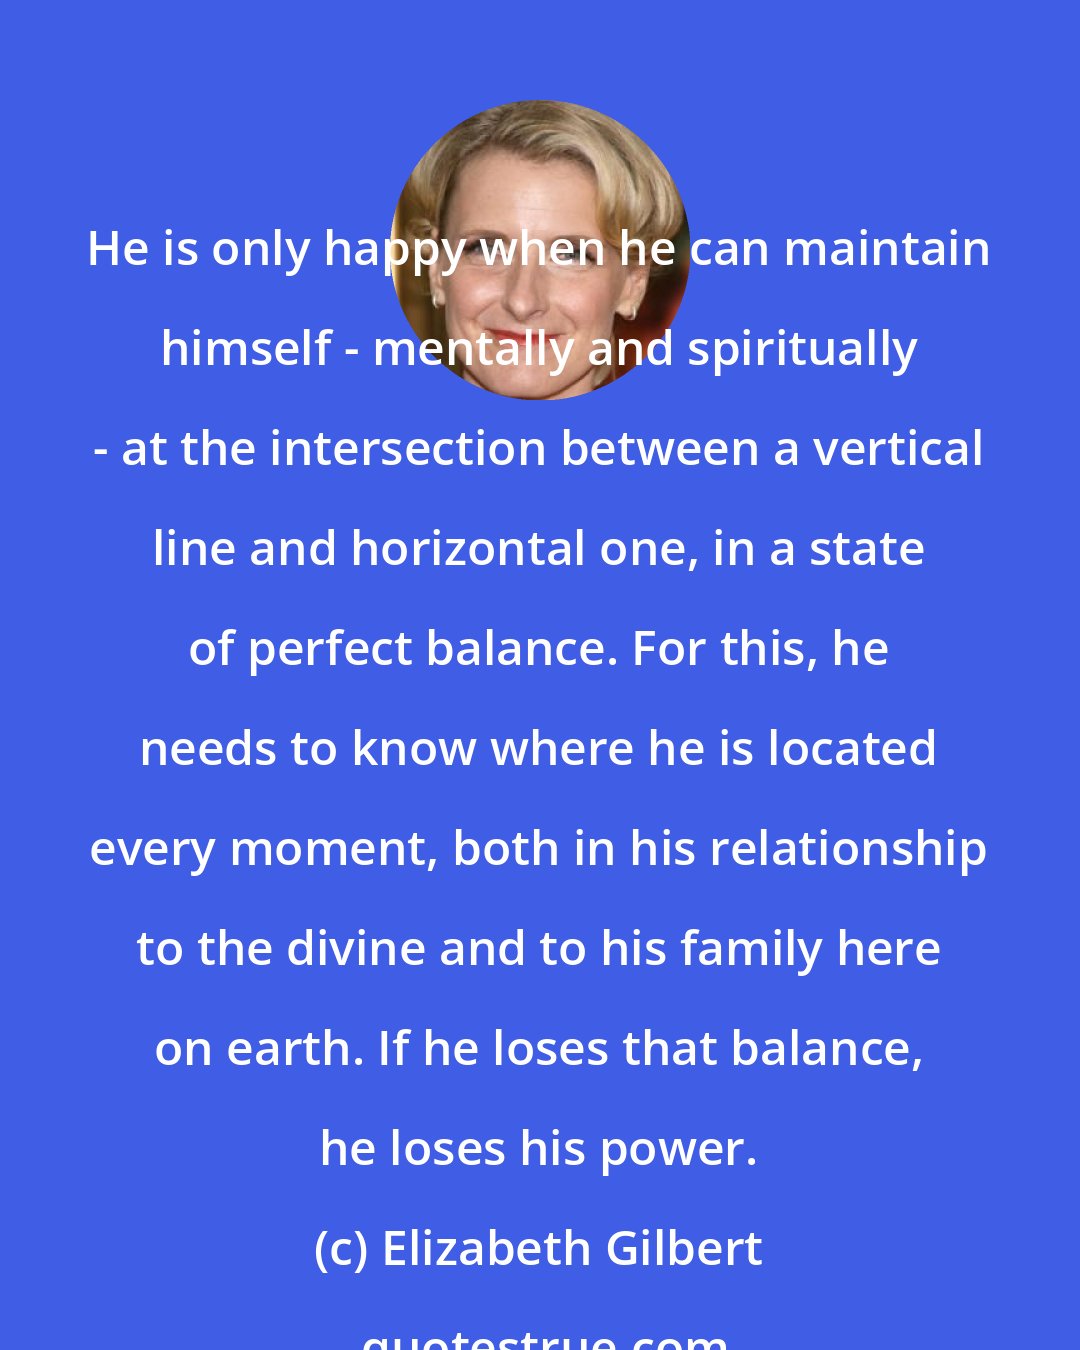 Elizabeth Gilbert: He is only happy when he can maintain himself - mentally and spiritually - at the intersection between a vertical line and horizontal one, in a state of perfect balance. For this, he needs to know where he is located every moment, both in his relationship to the divine and to his family here on earth. If he loses that balance, he loses his power.